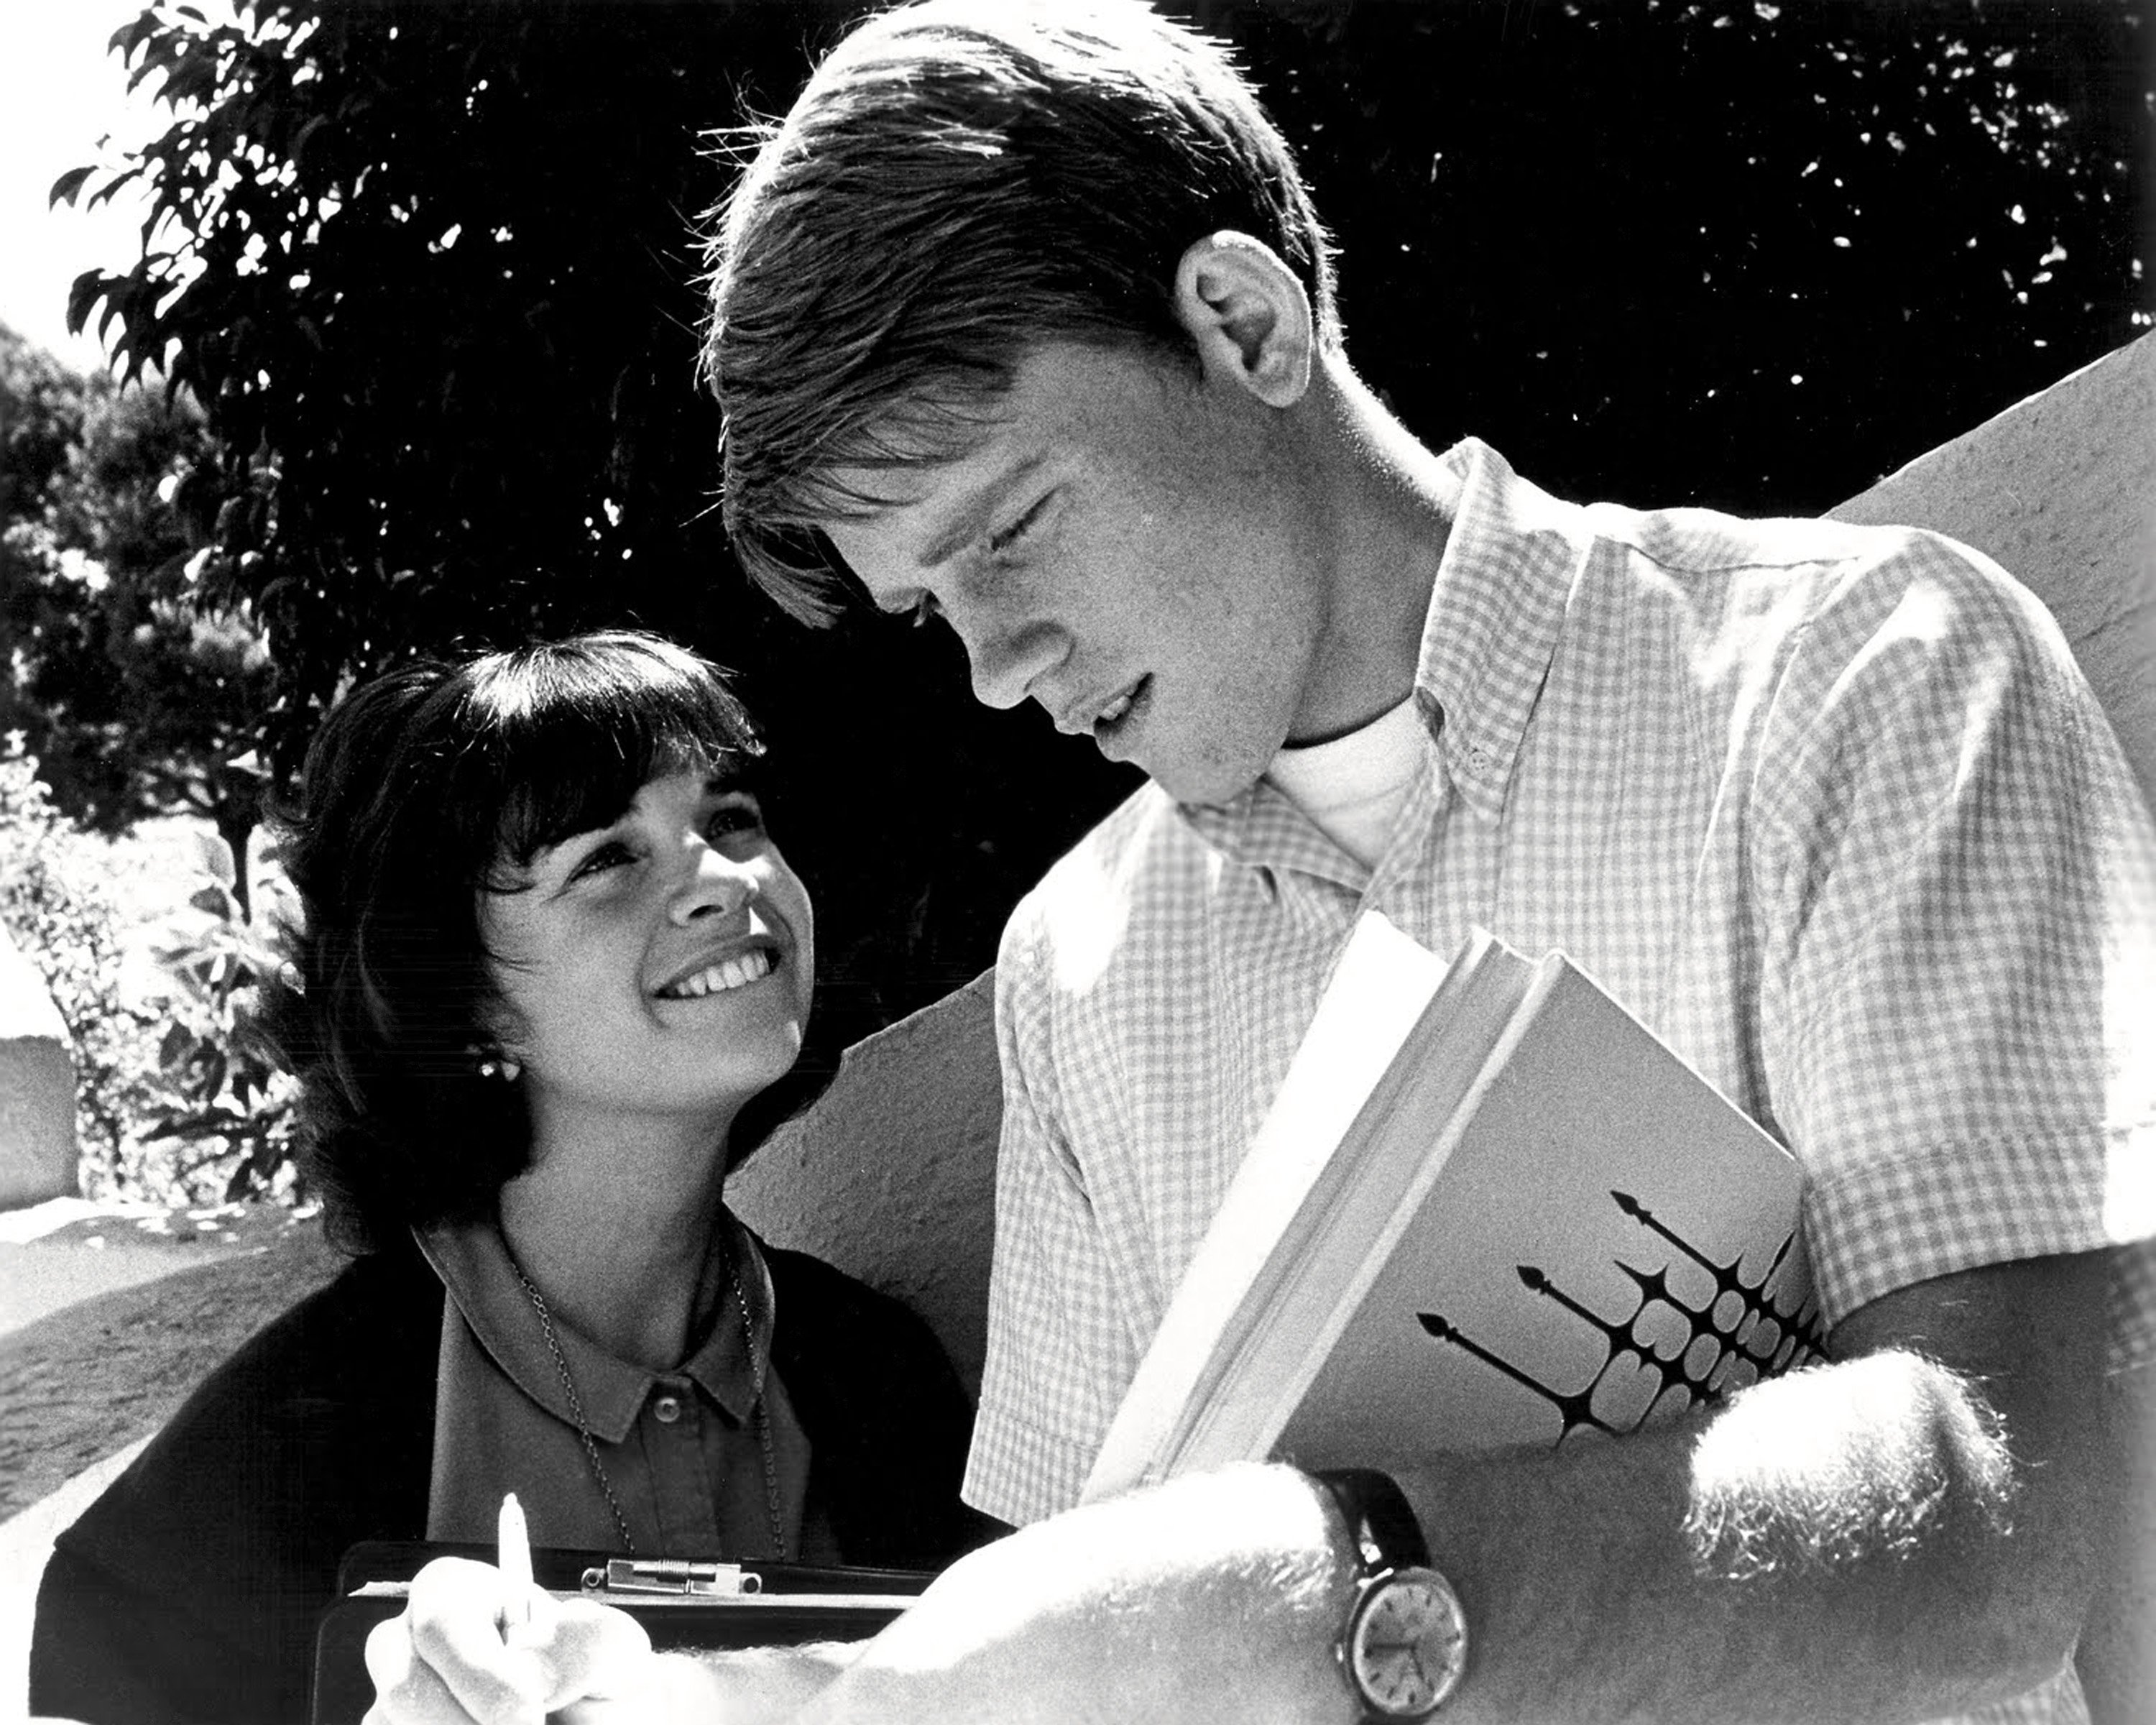 Ron Howard and Cindy Williams near a tree